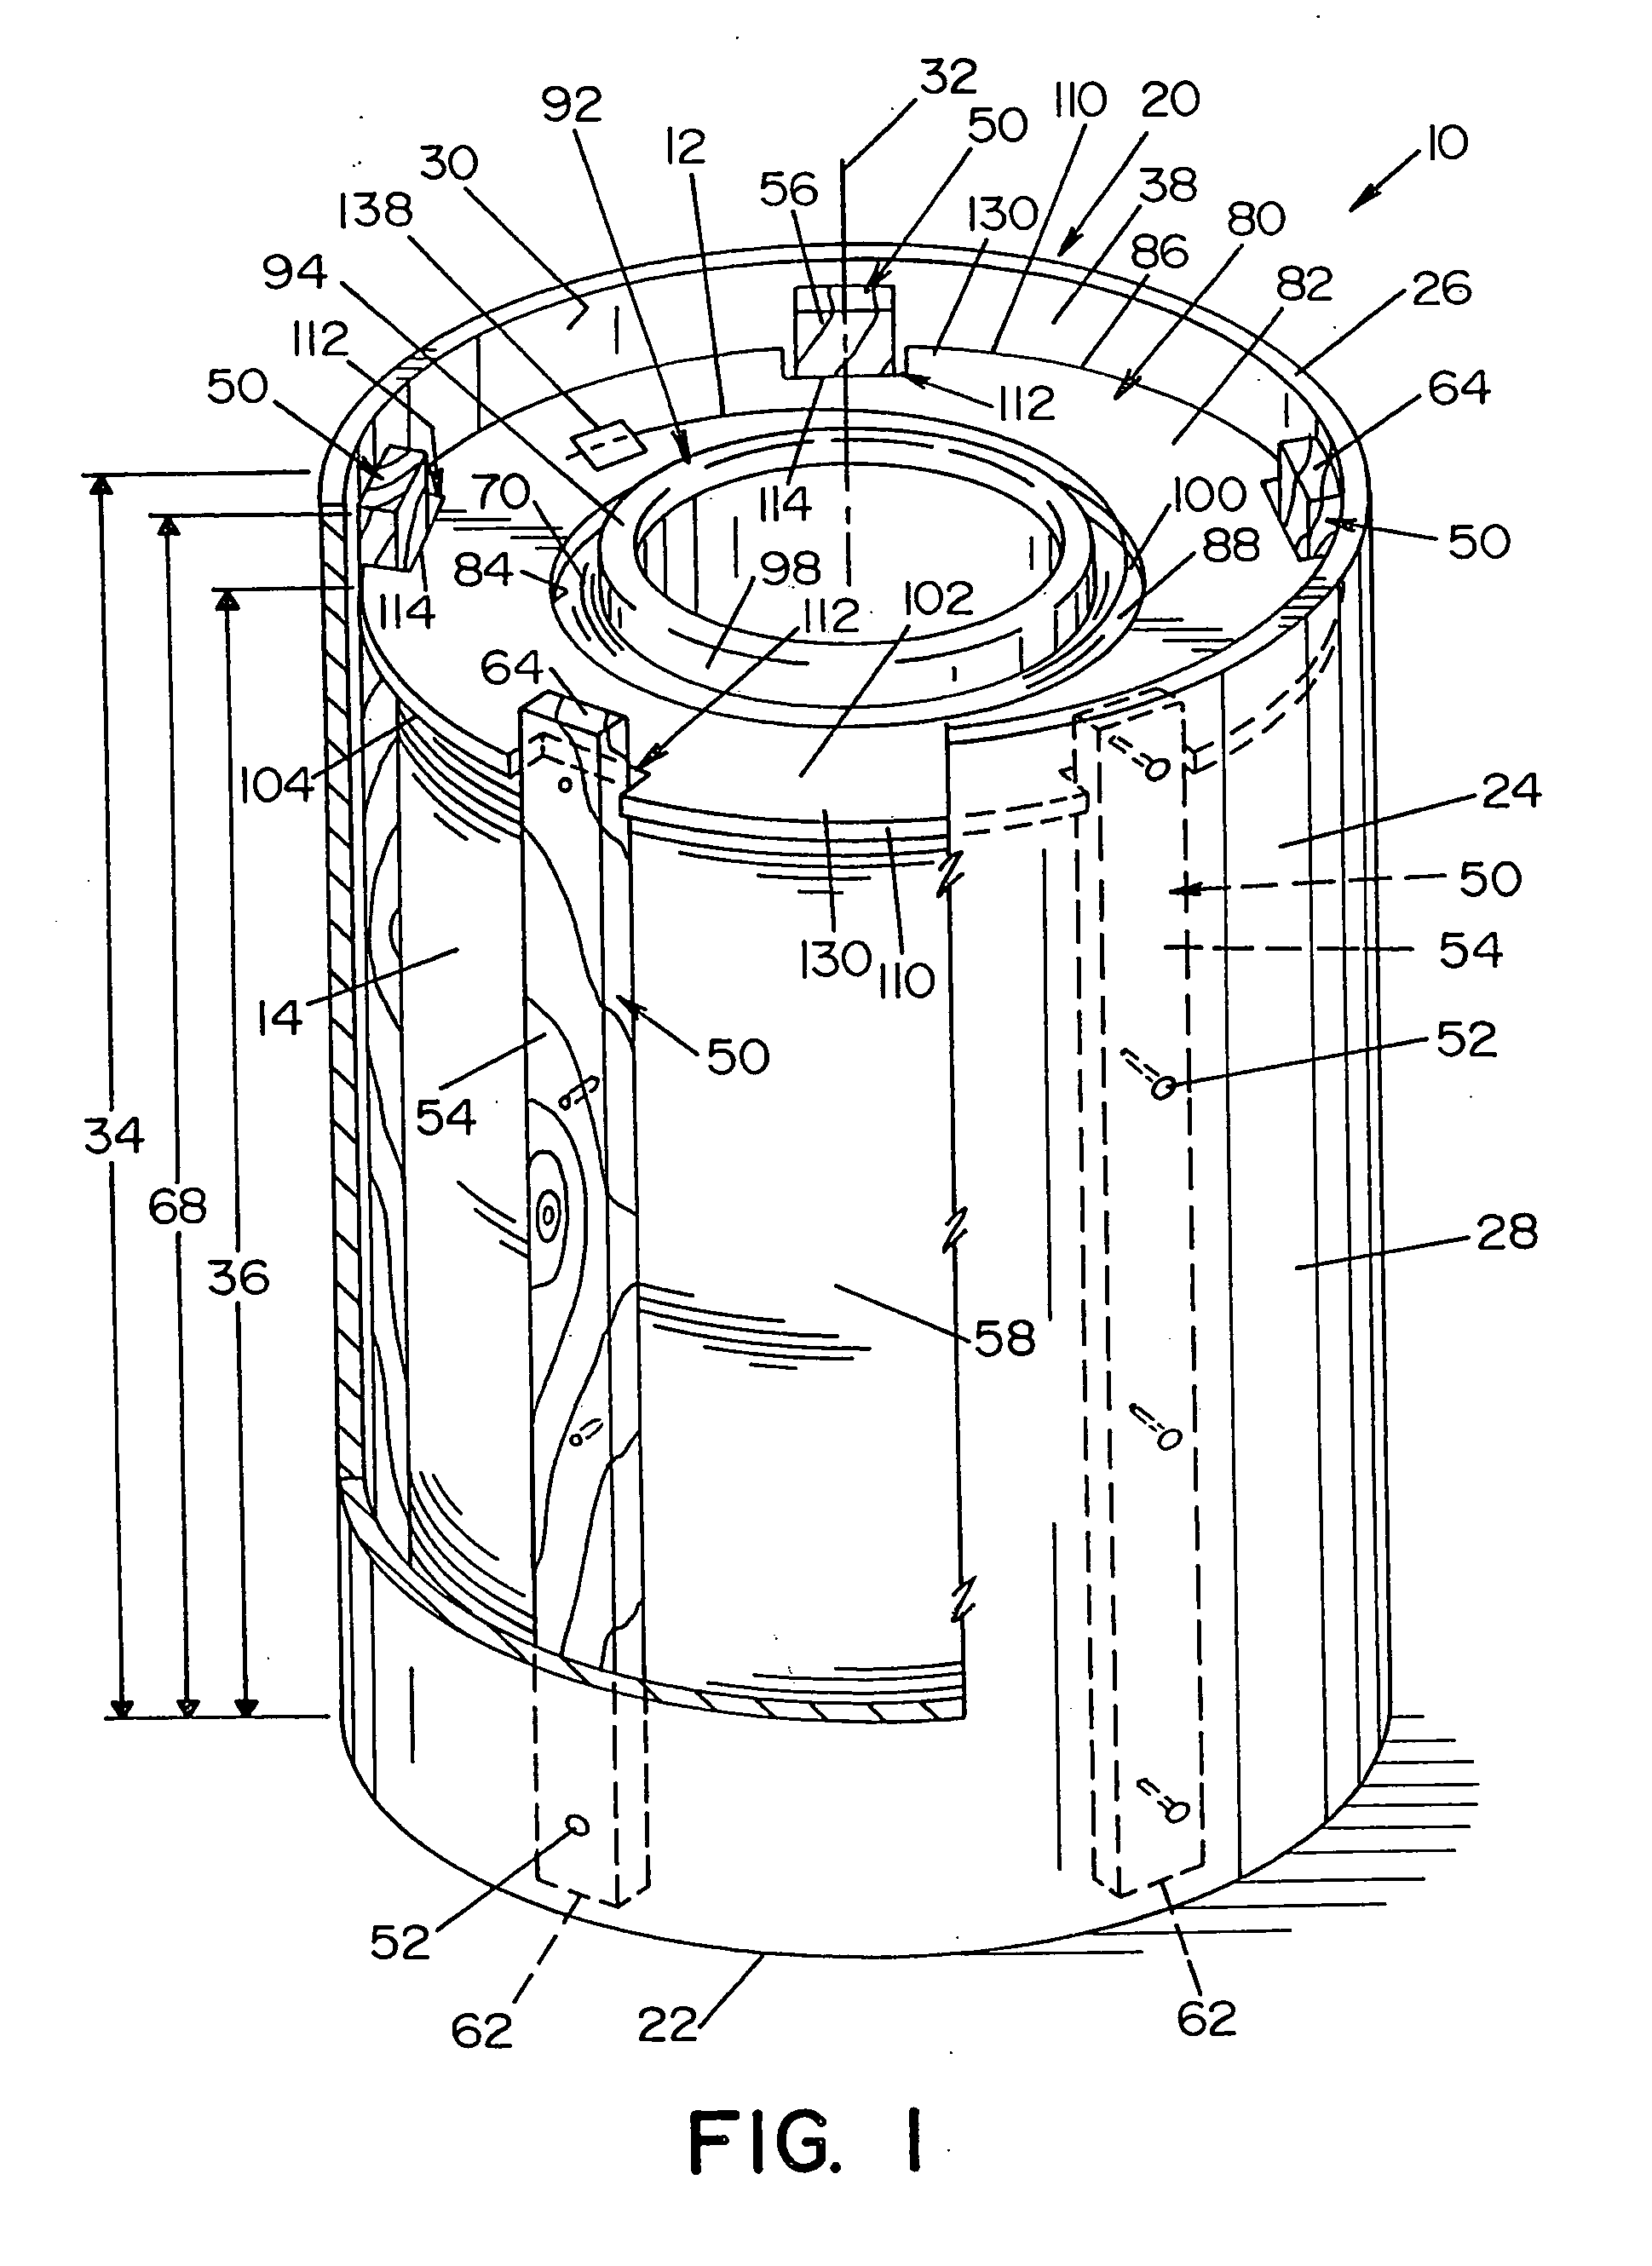 Welding wire container with ribbed walls and a mating retainer ring